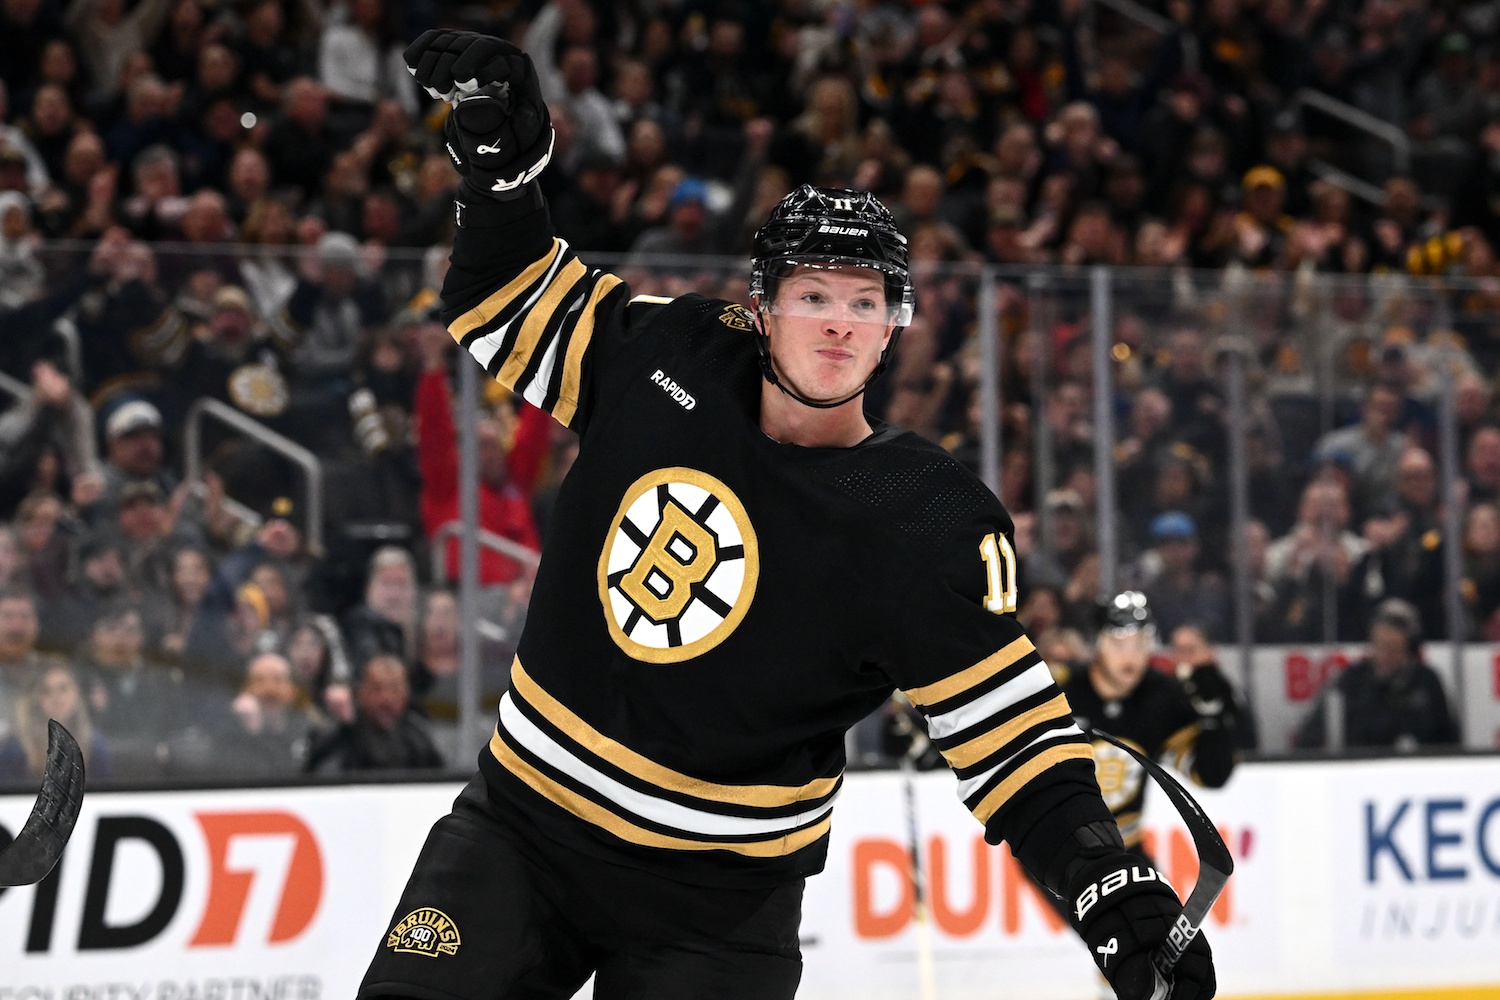 Nov 9, 2023; Boston, Massachusetts, USA; Boston Bruins center Trent Frederic (11) reacts after scoring a goal against the New York Islanders during the first period at the TD Garden. Mandatory Credit: Brian Fluharty-USA TODAY Sports